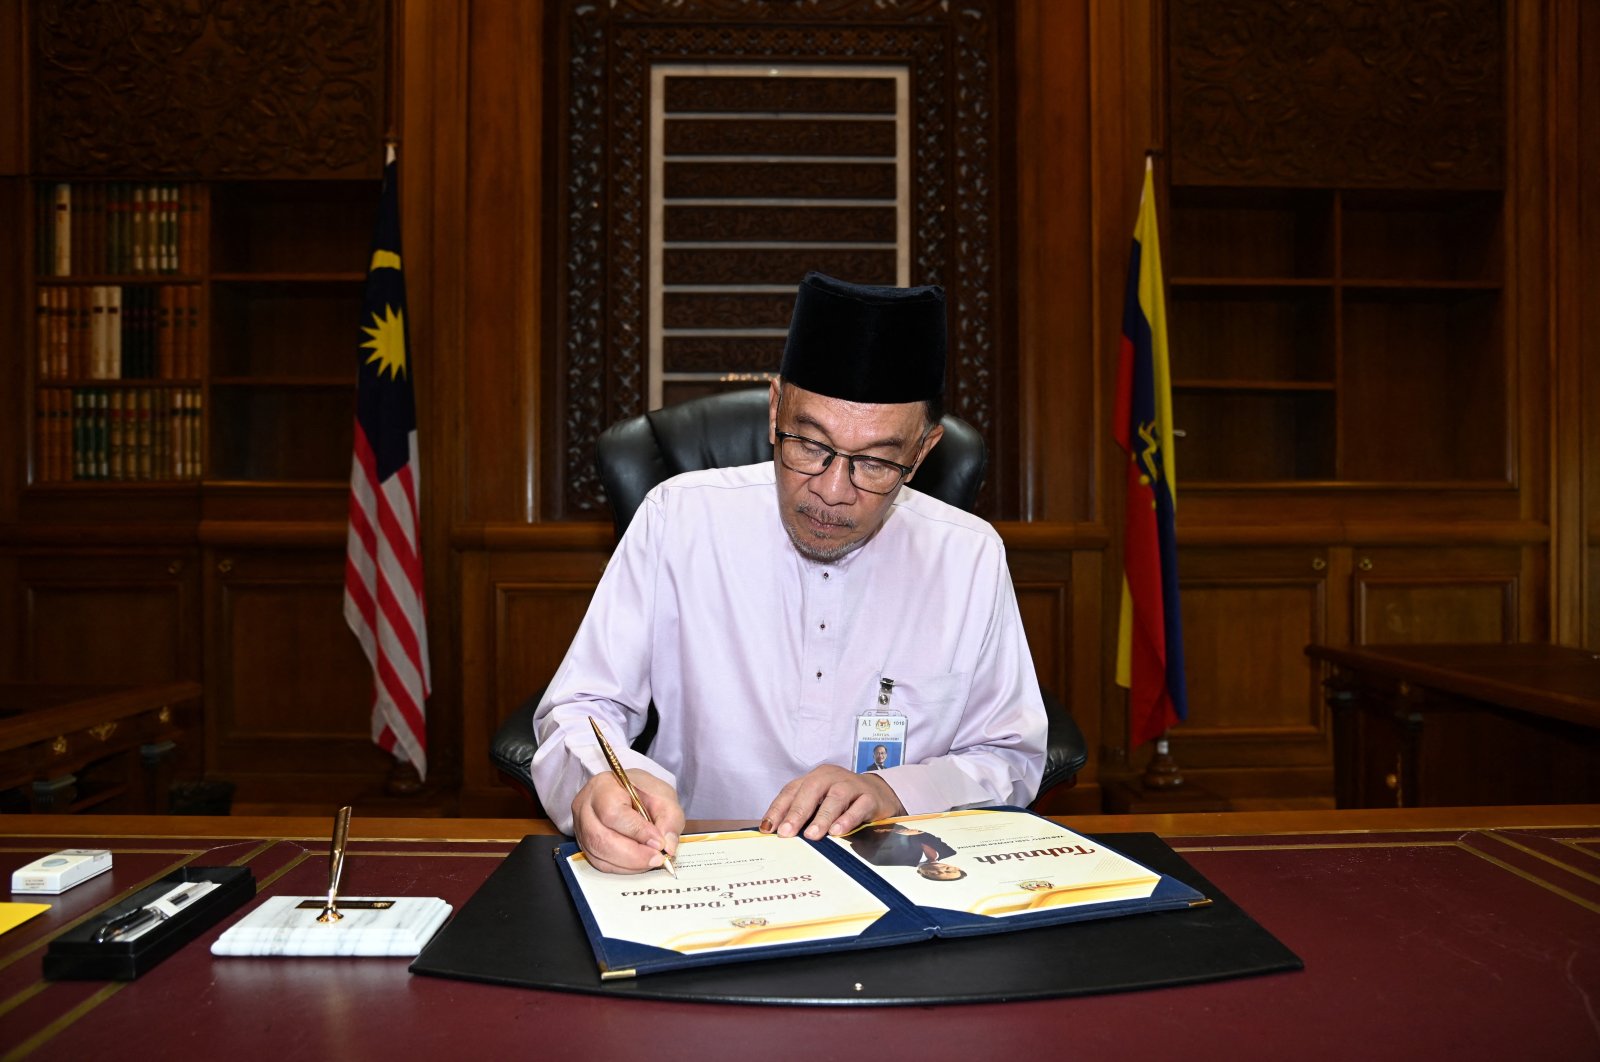 Malaysia&#039;s newly appointed Prime Minister Anwar Ibrahim signs a document as he clocks in to the prime minister&#039;s office on his first day holding the premier position at Putrajaya, Malaysia, Nov. 25, 2022. (Reuters Photo)